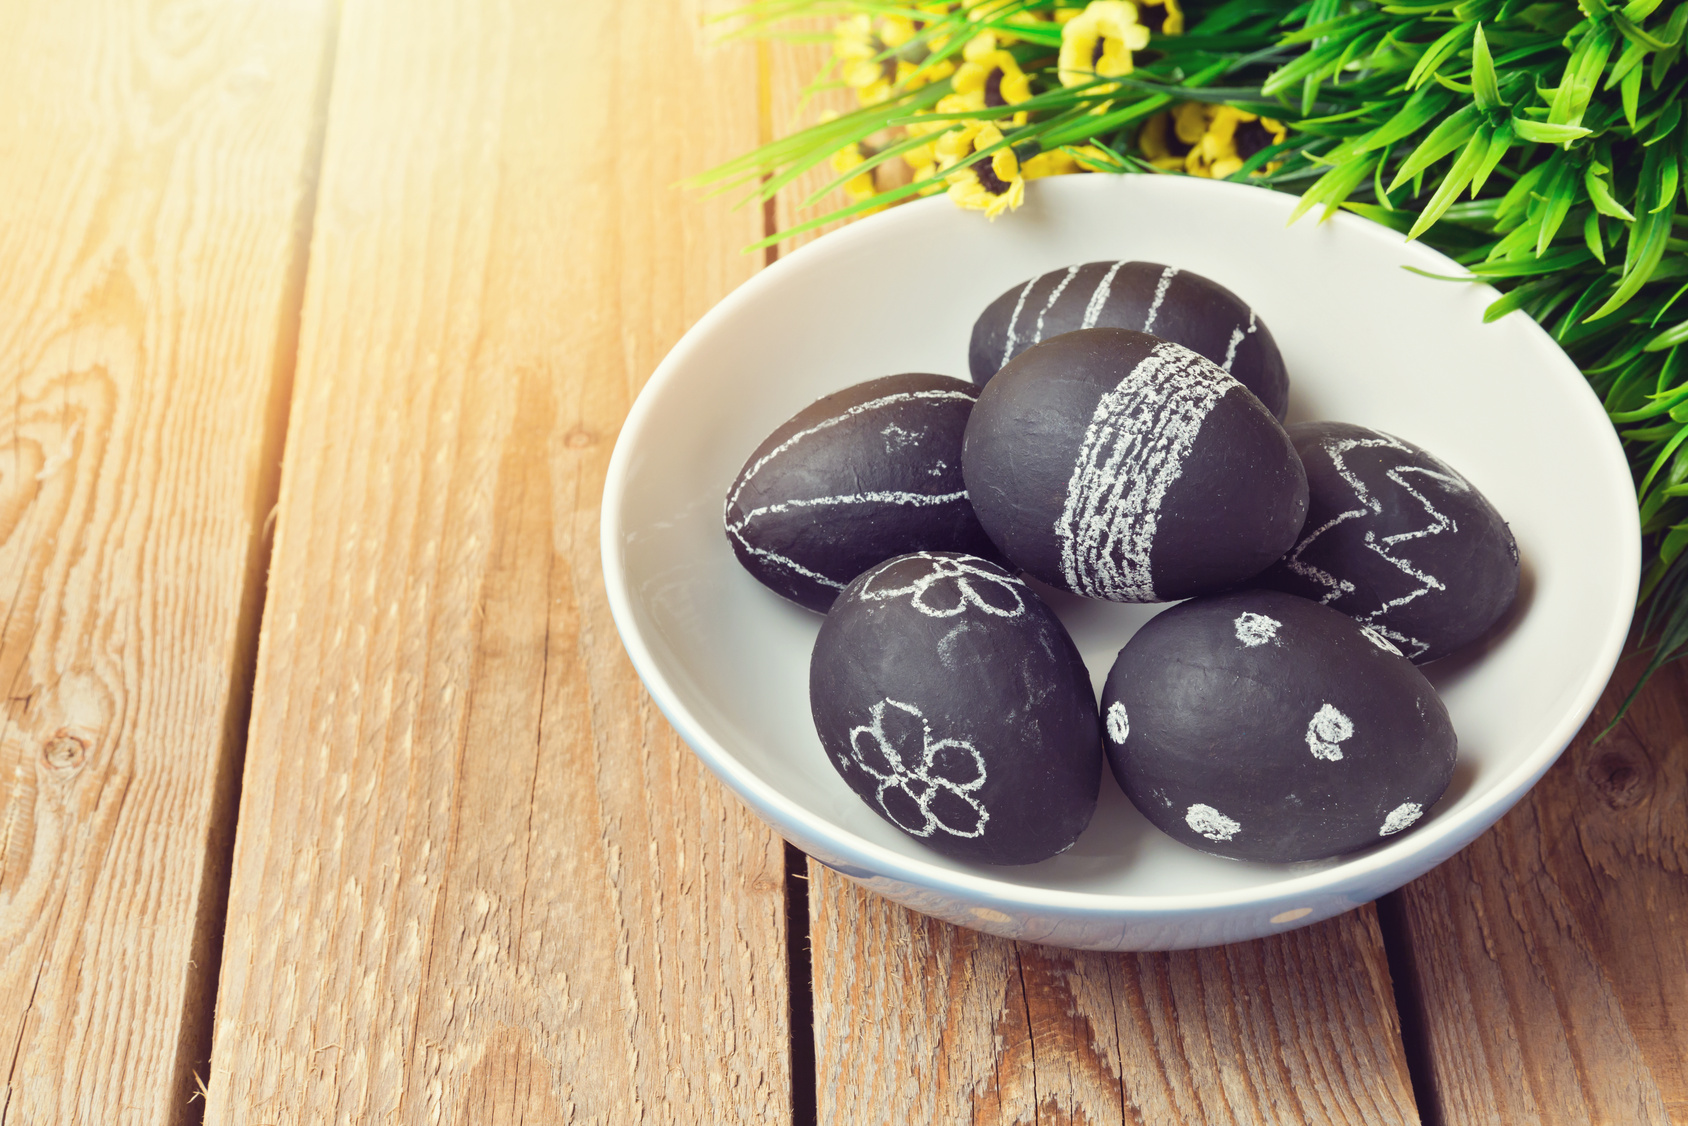 Easter eggs painted with chalkboard paint on wooden background